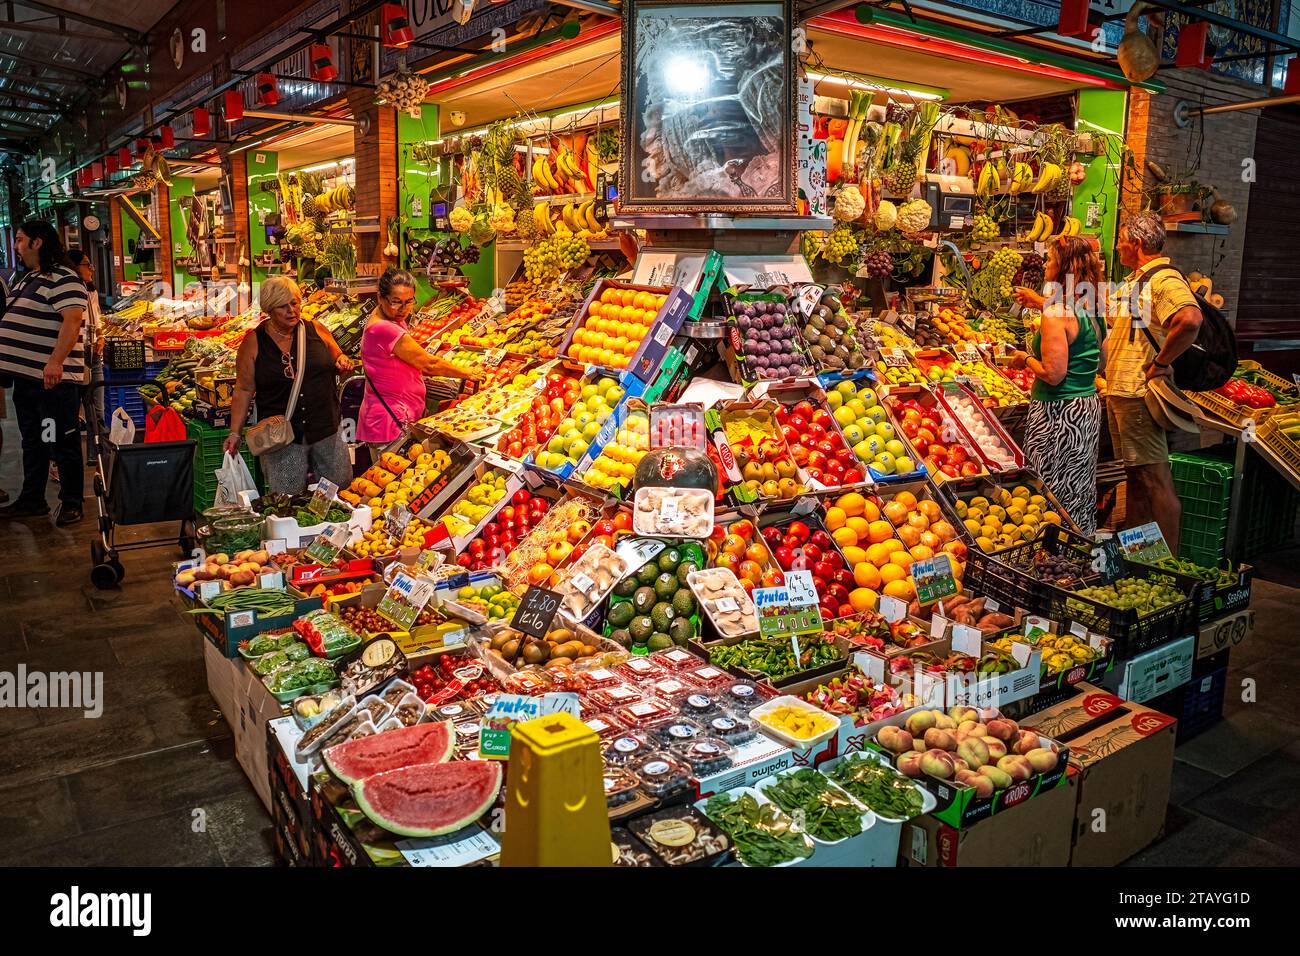 Fruit and vegetable market display at the Triana Market in Seville Spain Stock Photo